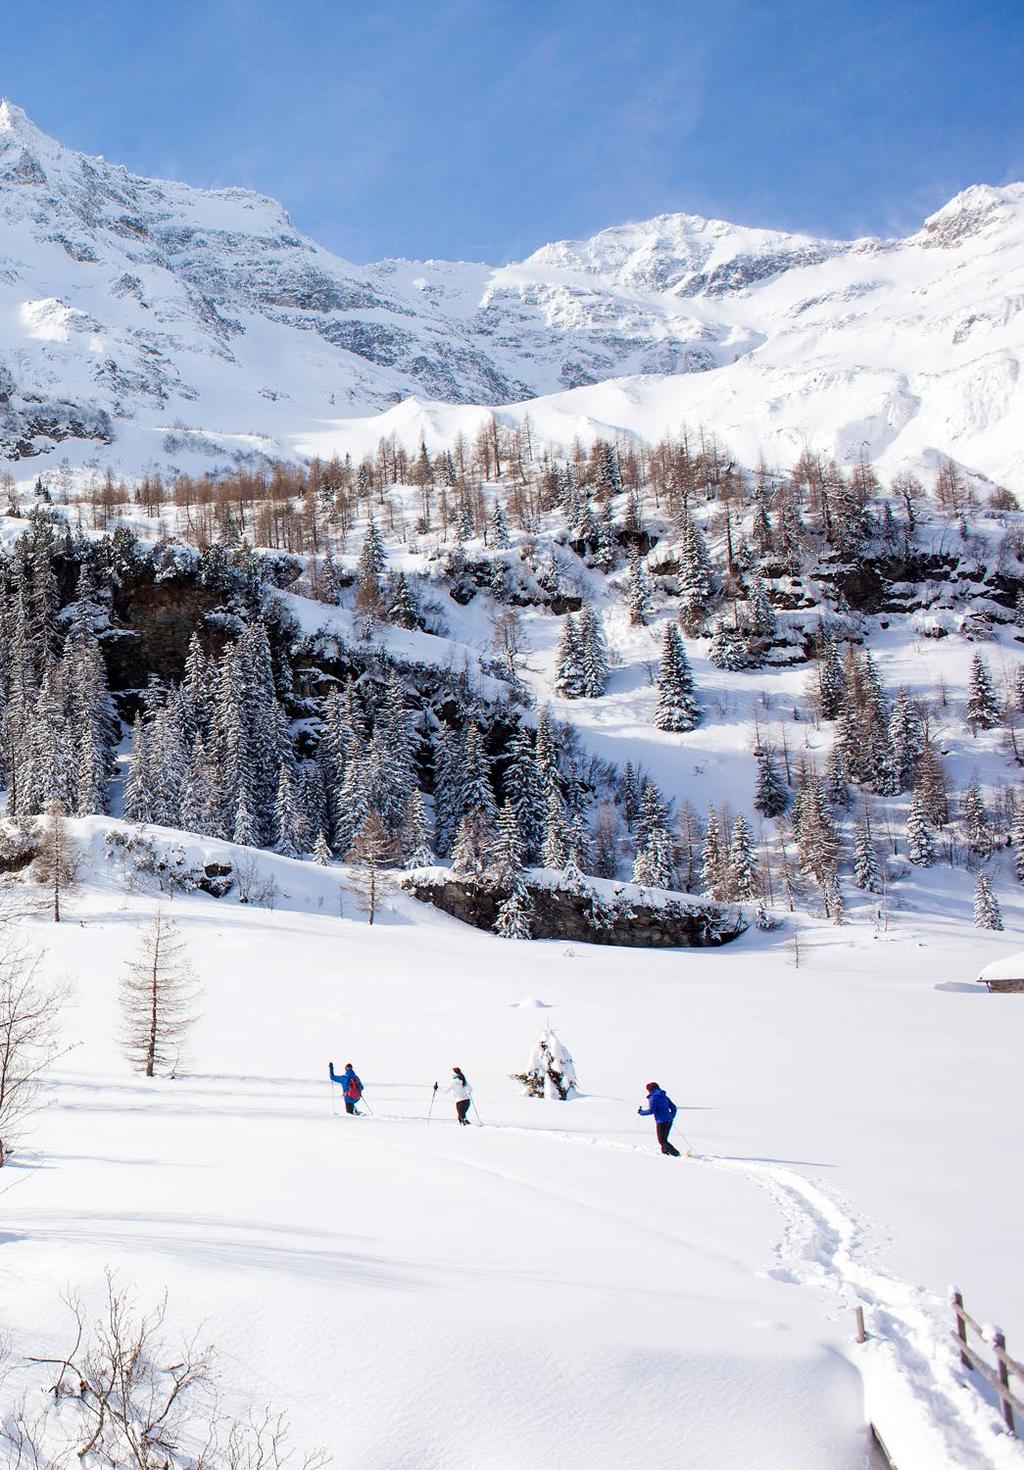 Rauris also makes a fantastic starting base for skiing in this region, with several large ski resorts within easy reach.